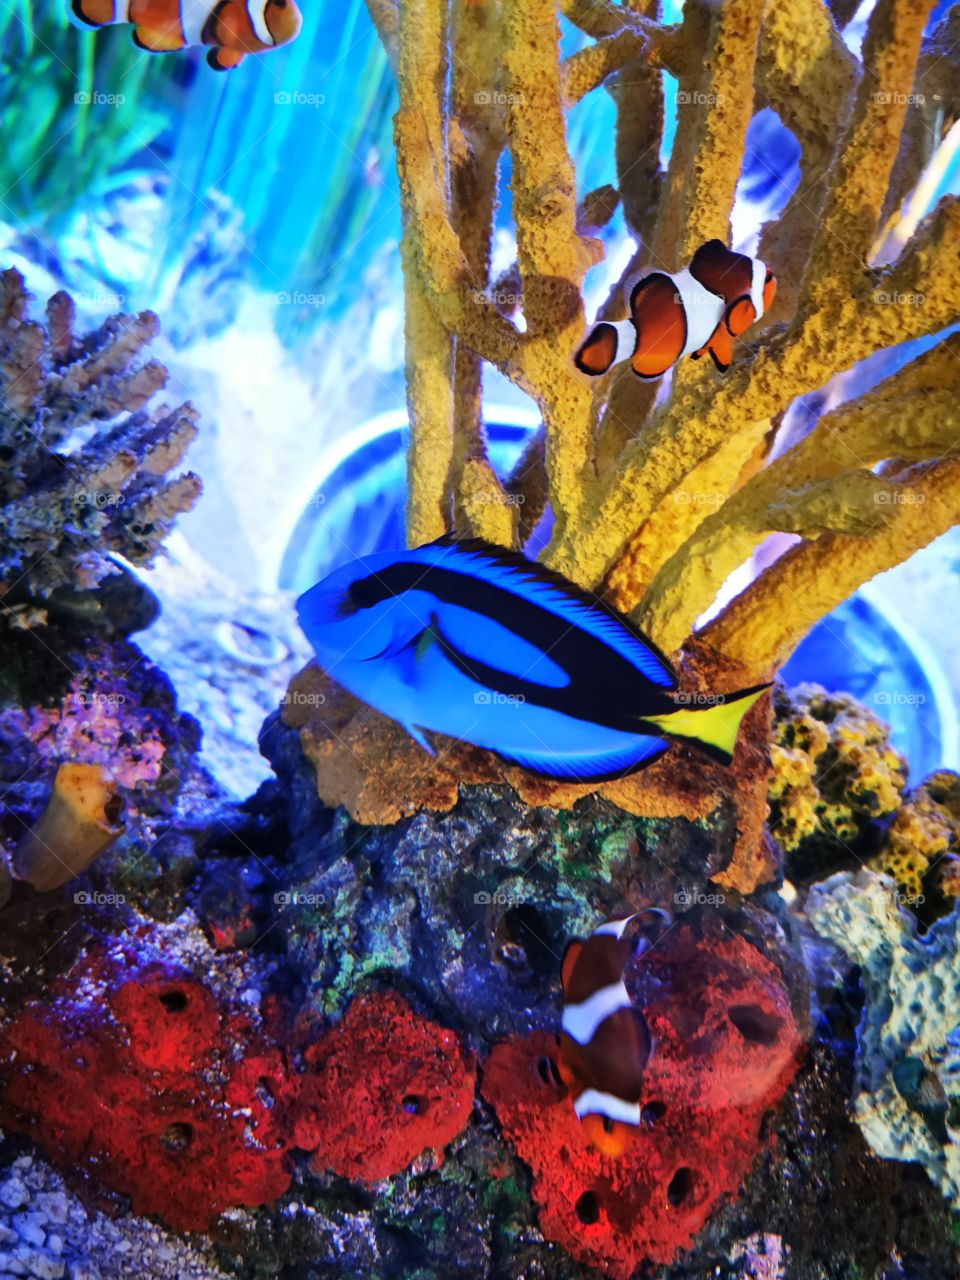 live action Nemo and Dory, surrounded by colorful coral. (Clown fish and Blue Tang fish)